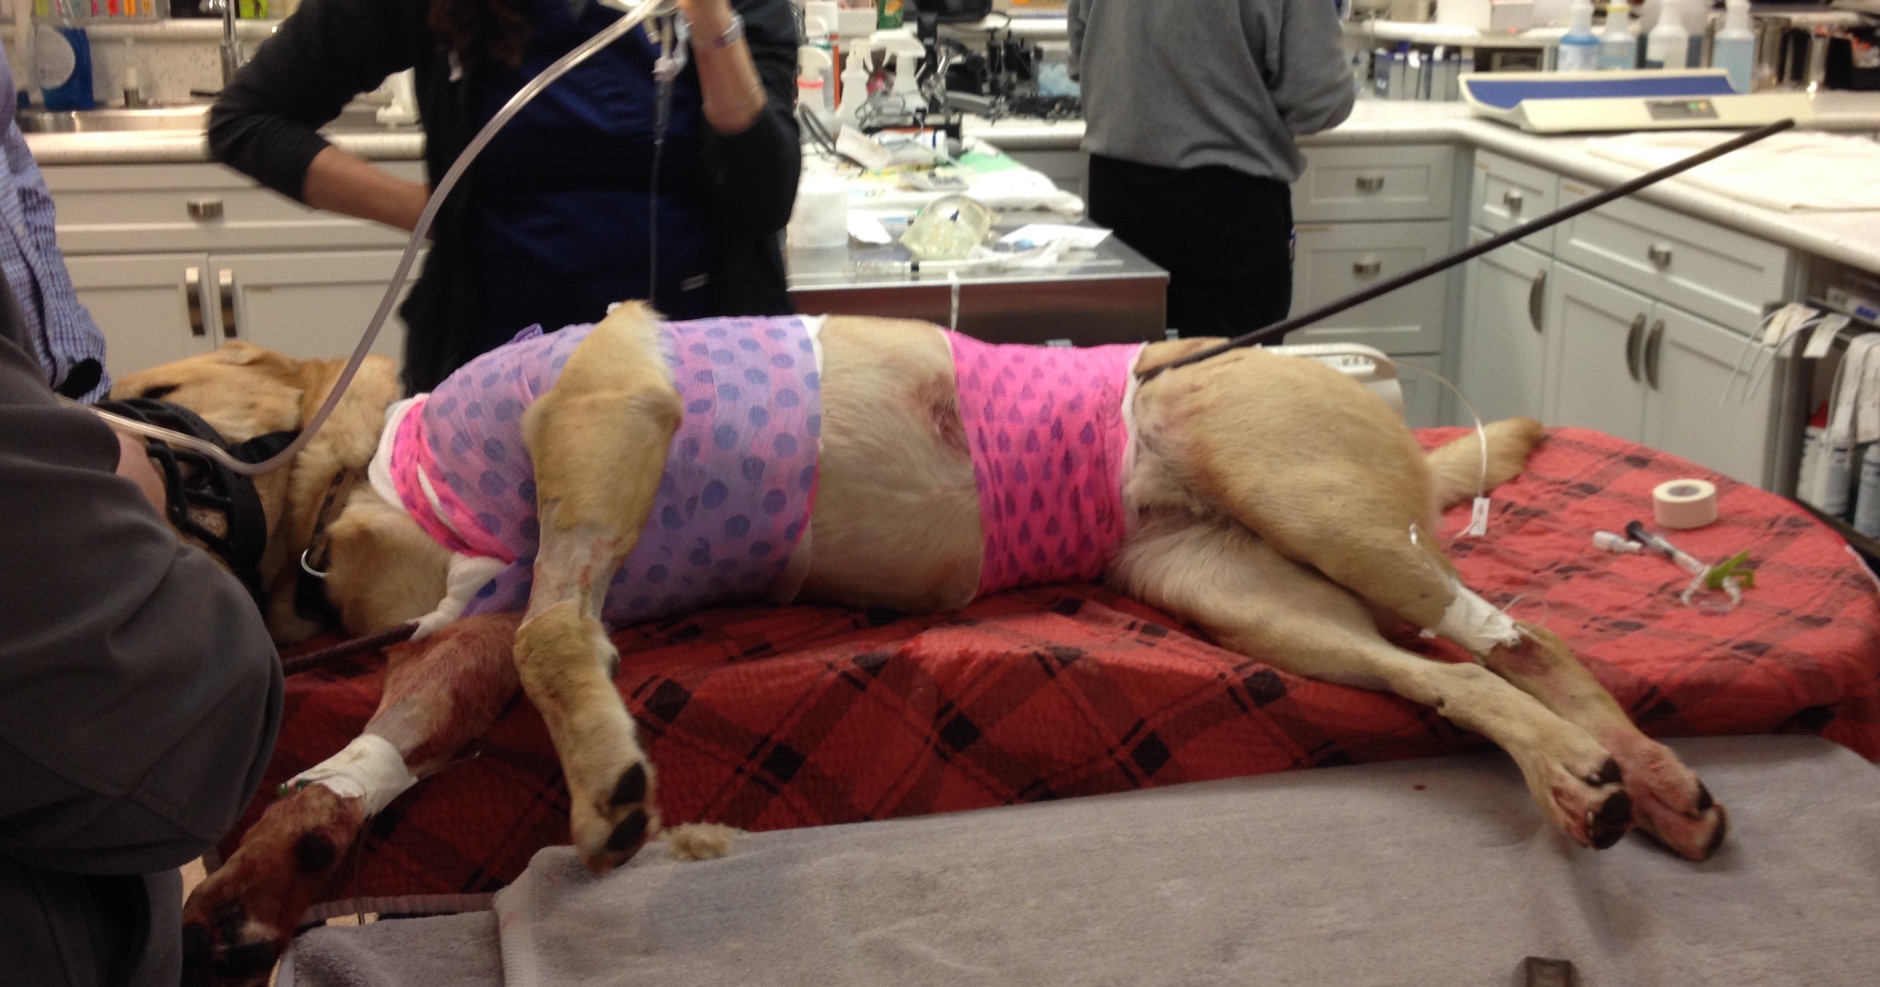 "He had damage to the lung," a surgeon said. "It went through the thorax, but missed the heart, that was fortunate." The dog's owners are asking for help in paying his $10,000 surgery bill online, through the Veterinary Care Foundation. (Courtesy of Veterinary Surgical Centers)